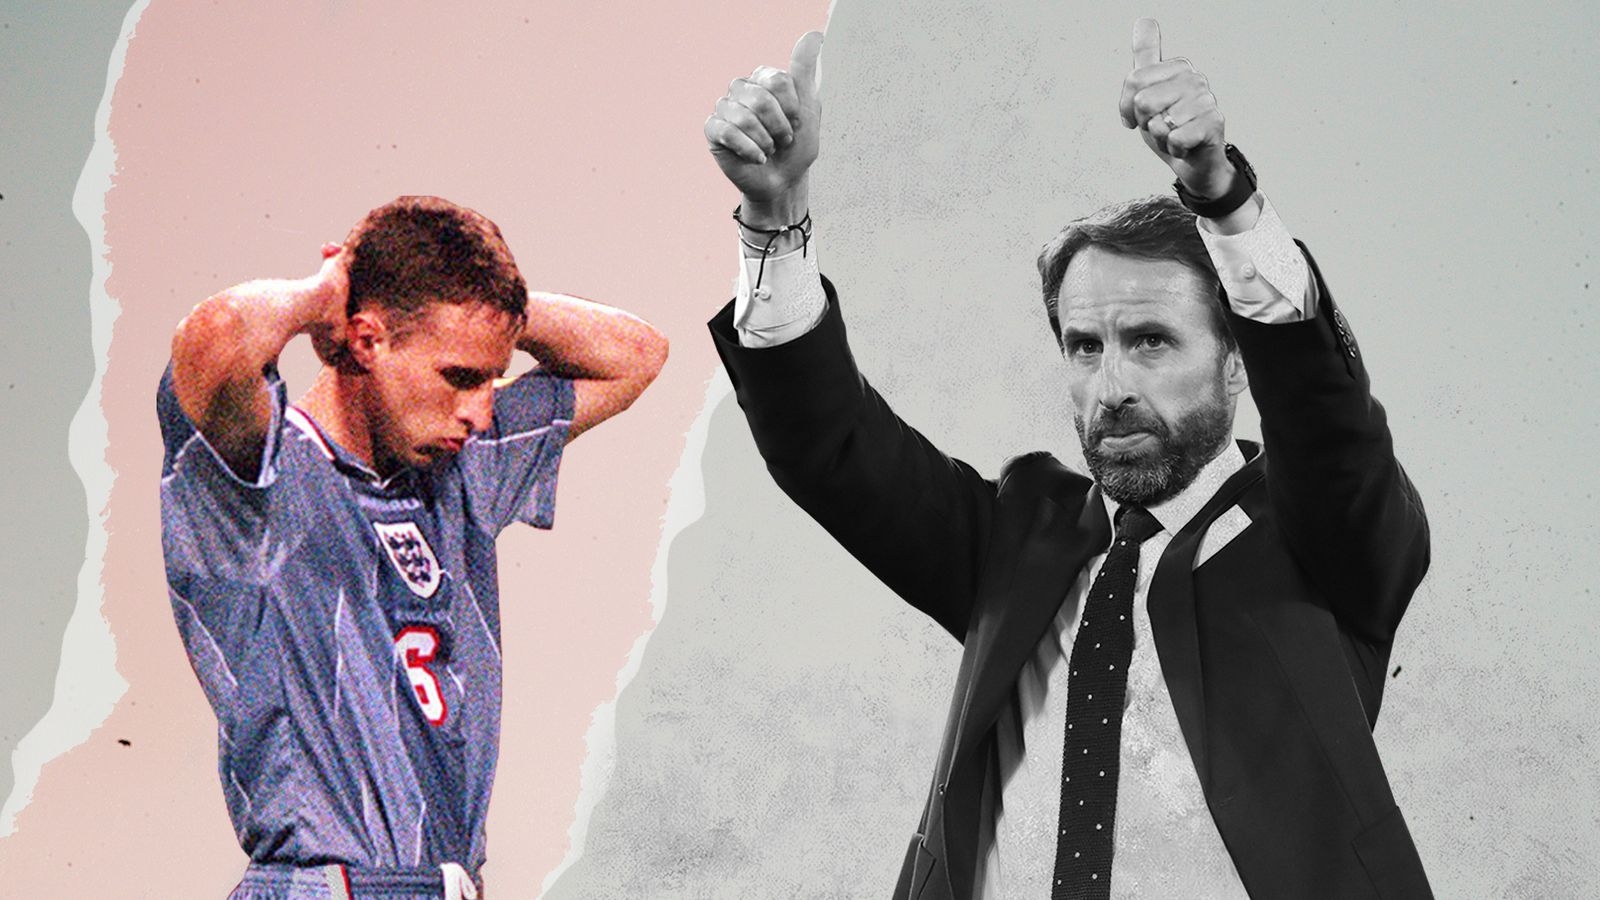 Who Is Gareth Southgate - Manager of English Football Team: Biography, Personal Life, Net Worth, Football Career